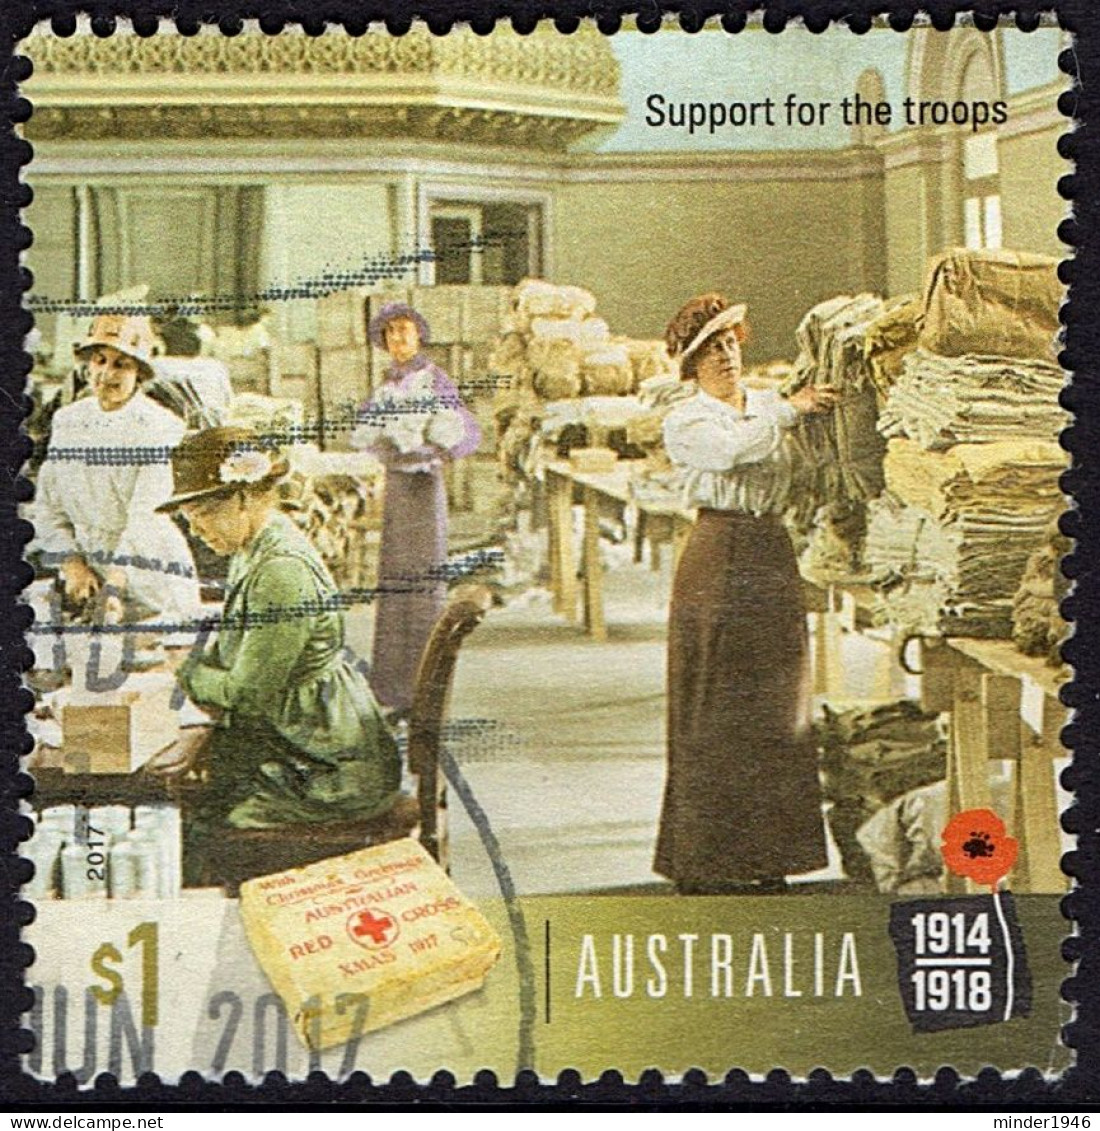 AUSTRALIA 2017 $1 Multicoloured, Centenary Of WWI 1917-Support For The Troops Used - Usados